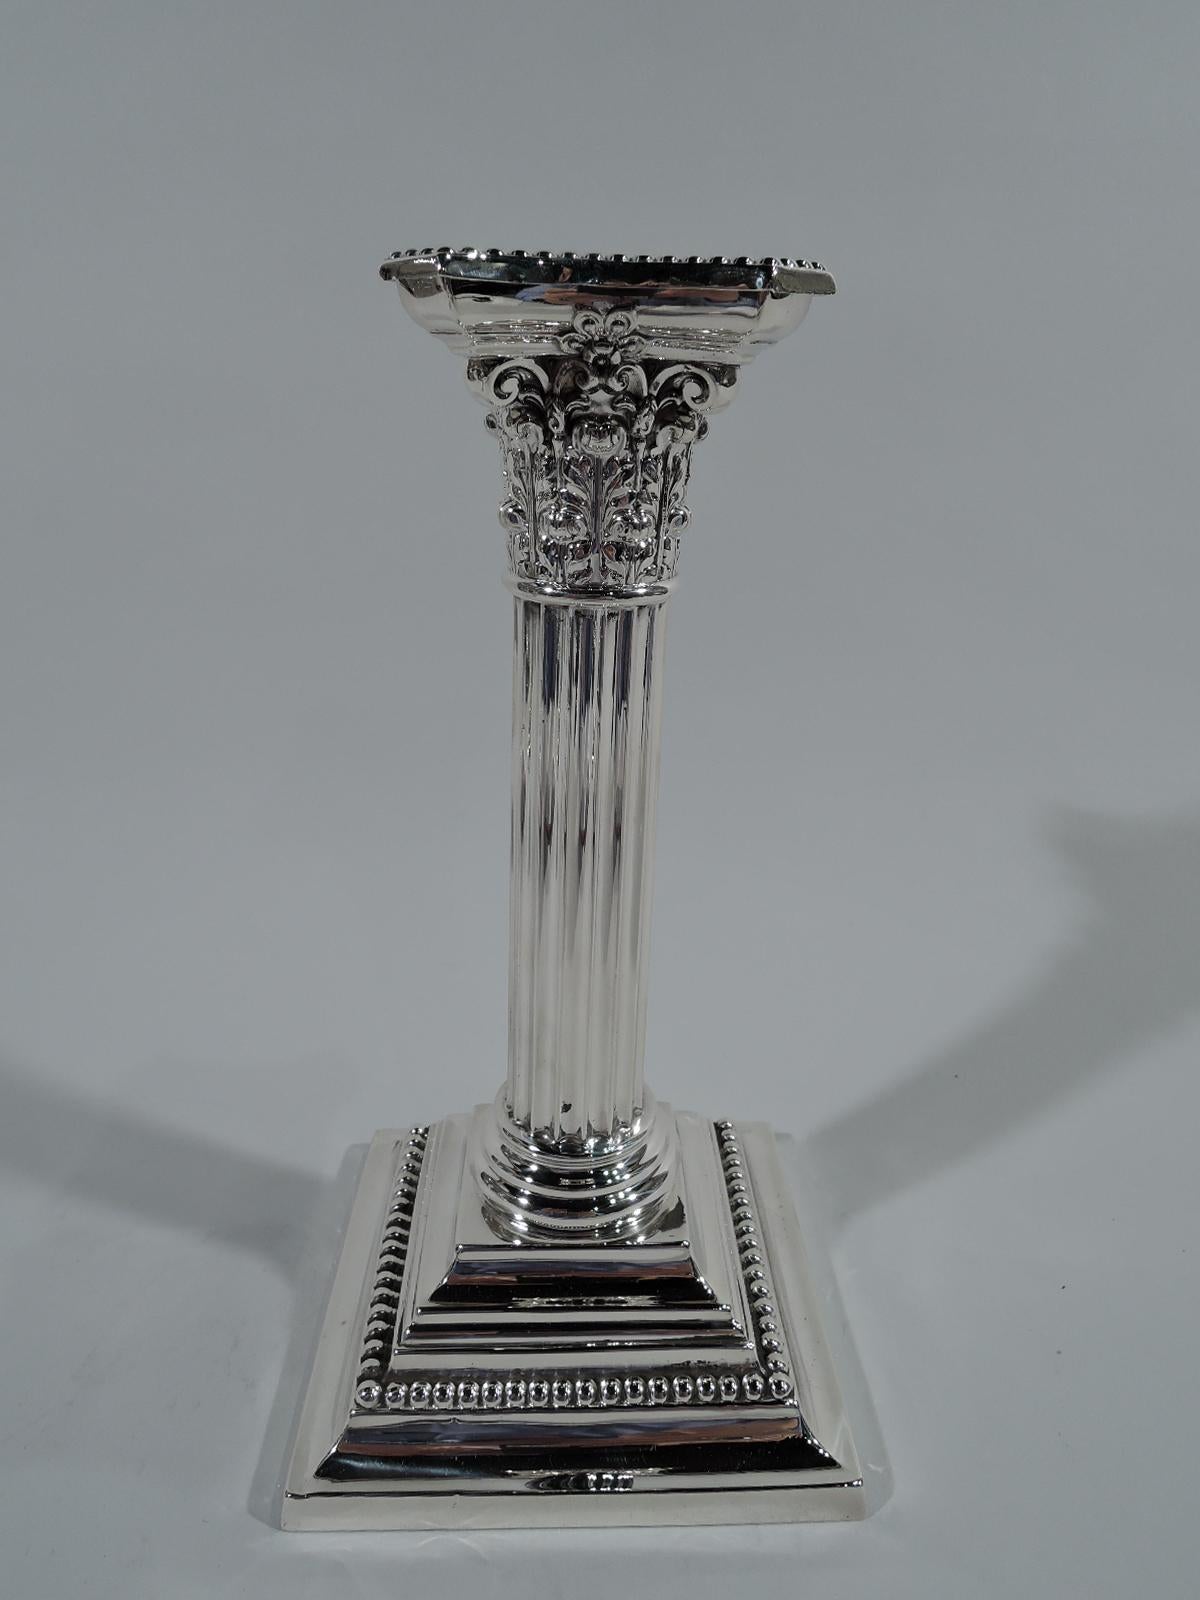 Pair of sterling silver classical column candlesticks. Made by Gorham in Providence in 1906. Each fluted shaft on stepped square base. Composite capital with chamfered, concave, and detachable bobeche. Beading. Hallmark includes no. A3206 and date